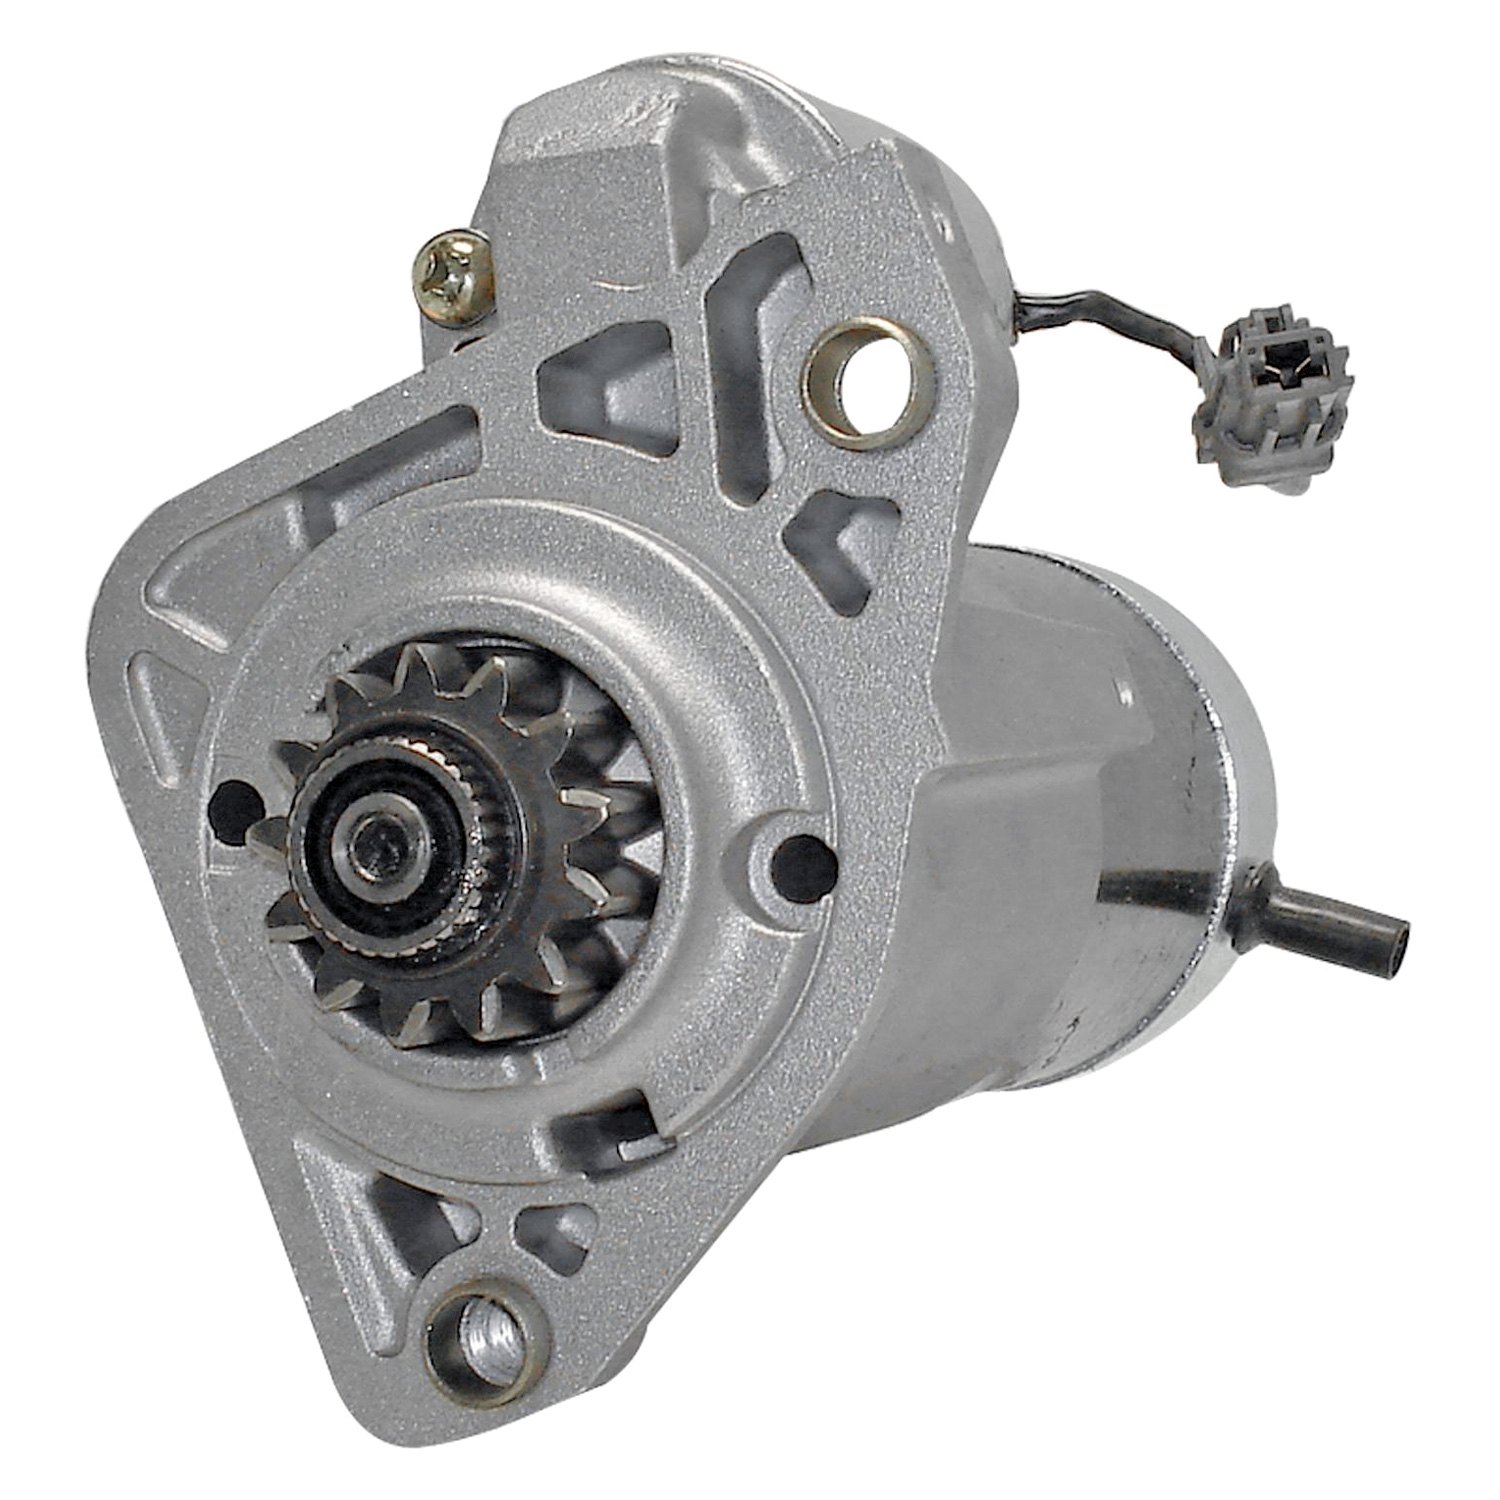 ACDelco® A   Gold™ Remanufactured Starter